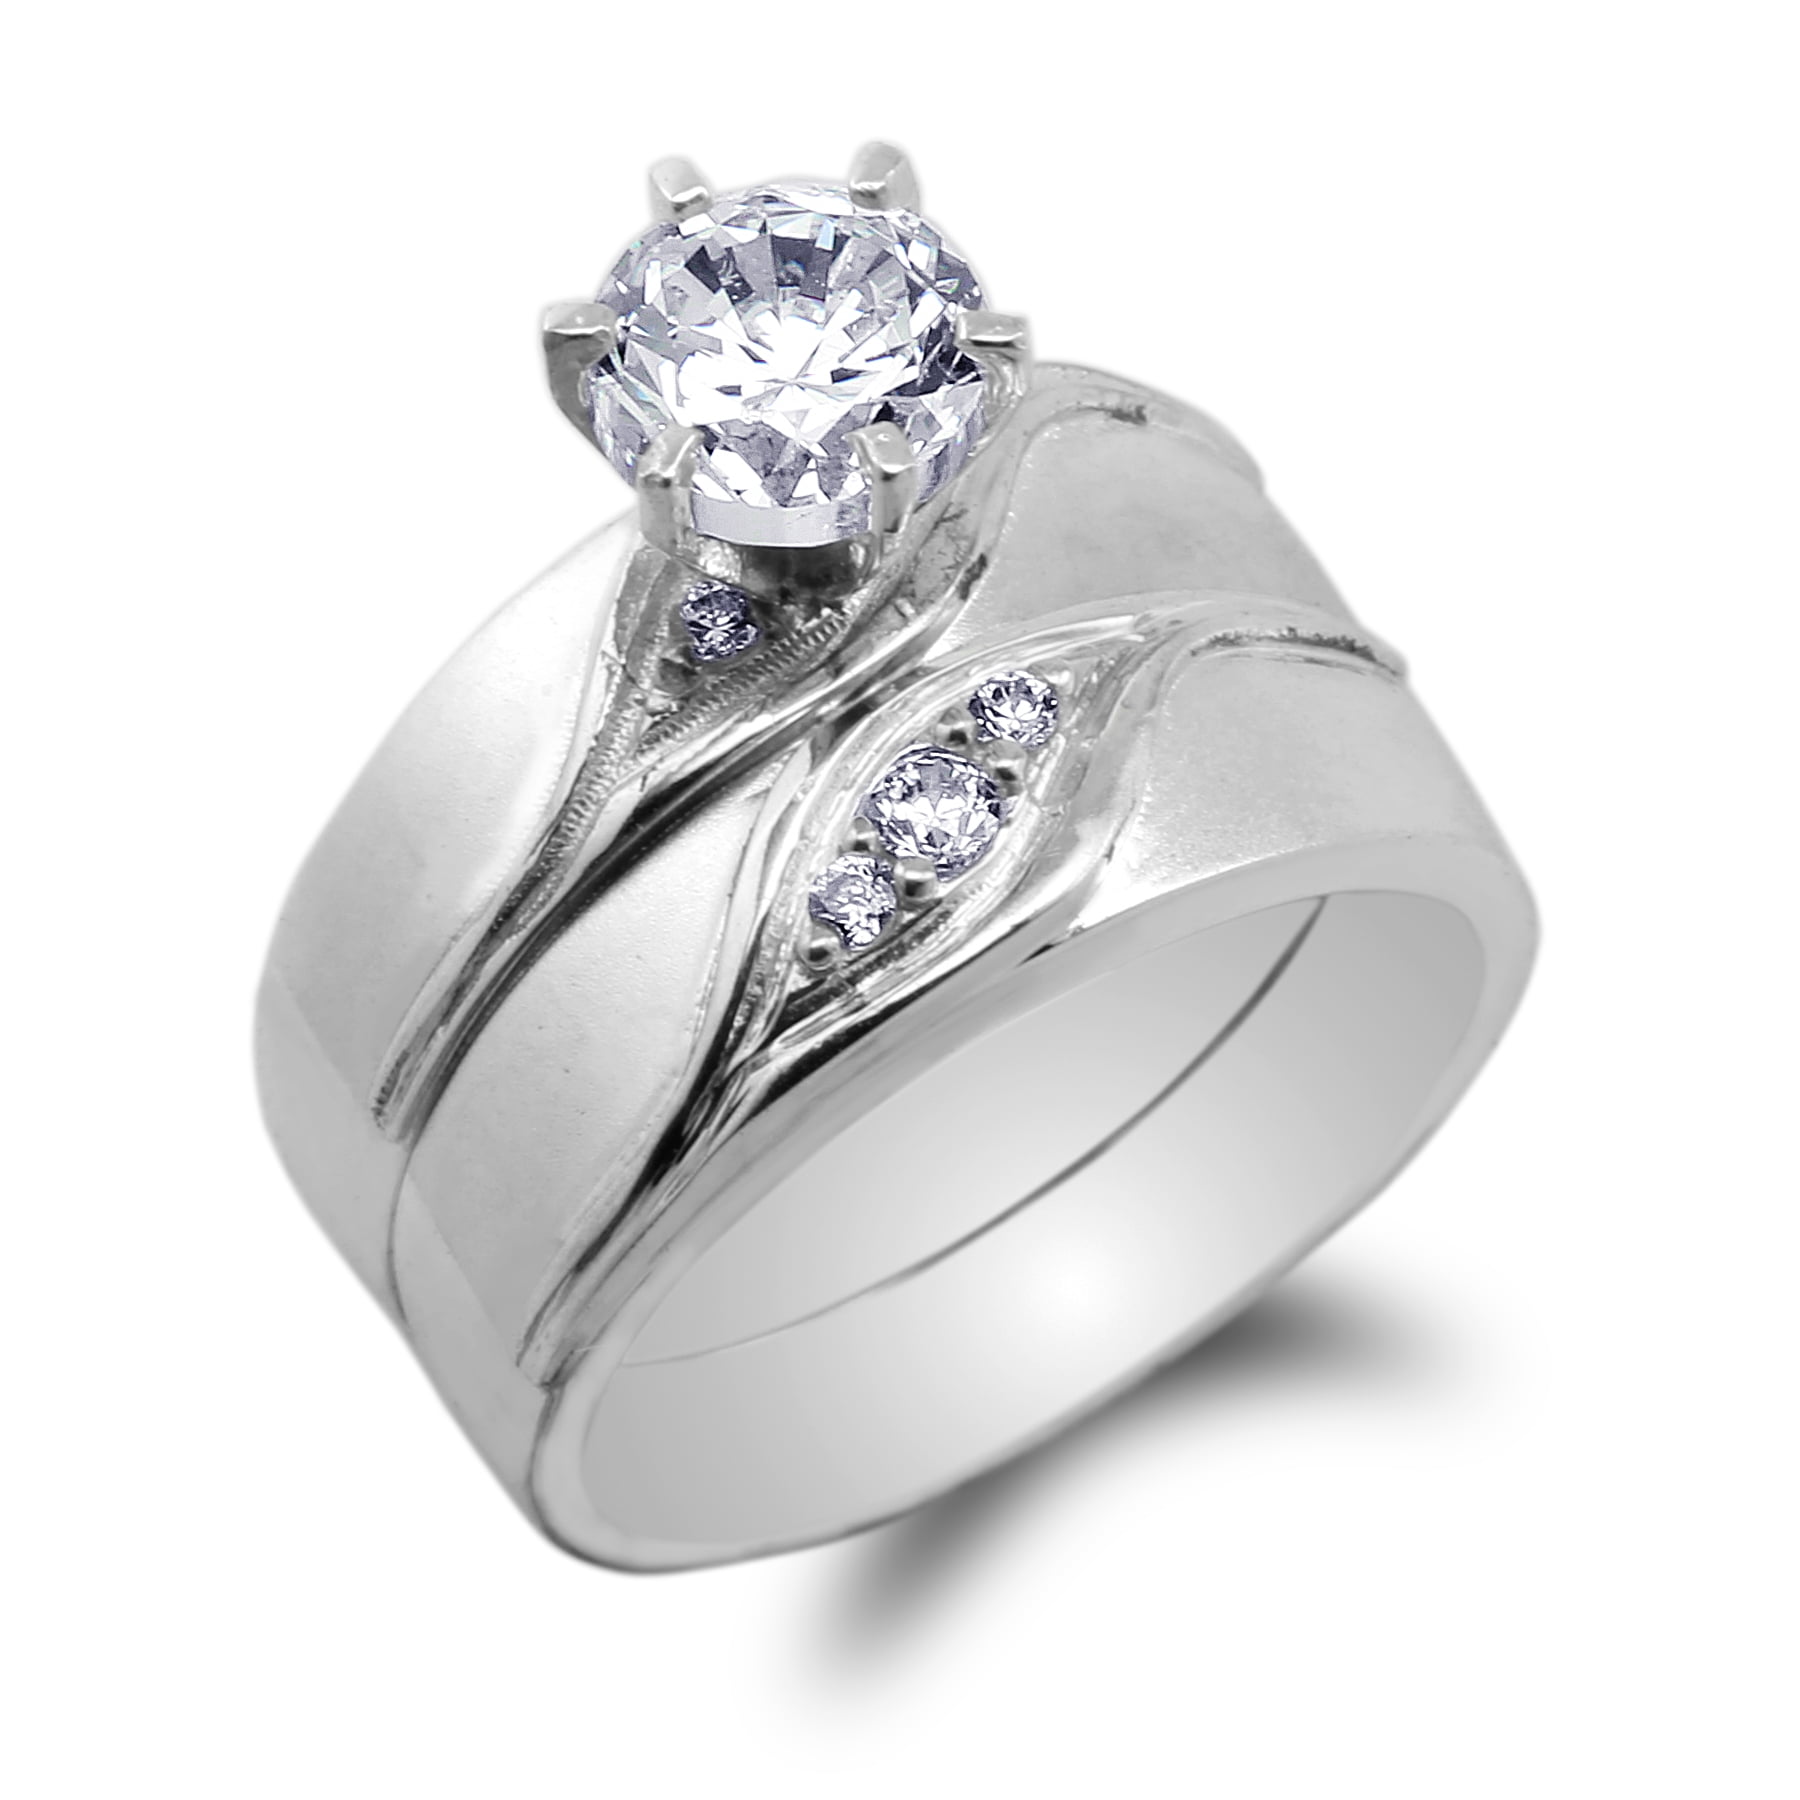 Womens 925 Sterling Silver Duo Set Round CZ Wedding Unique Solitaire Ring Size 4-10